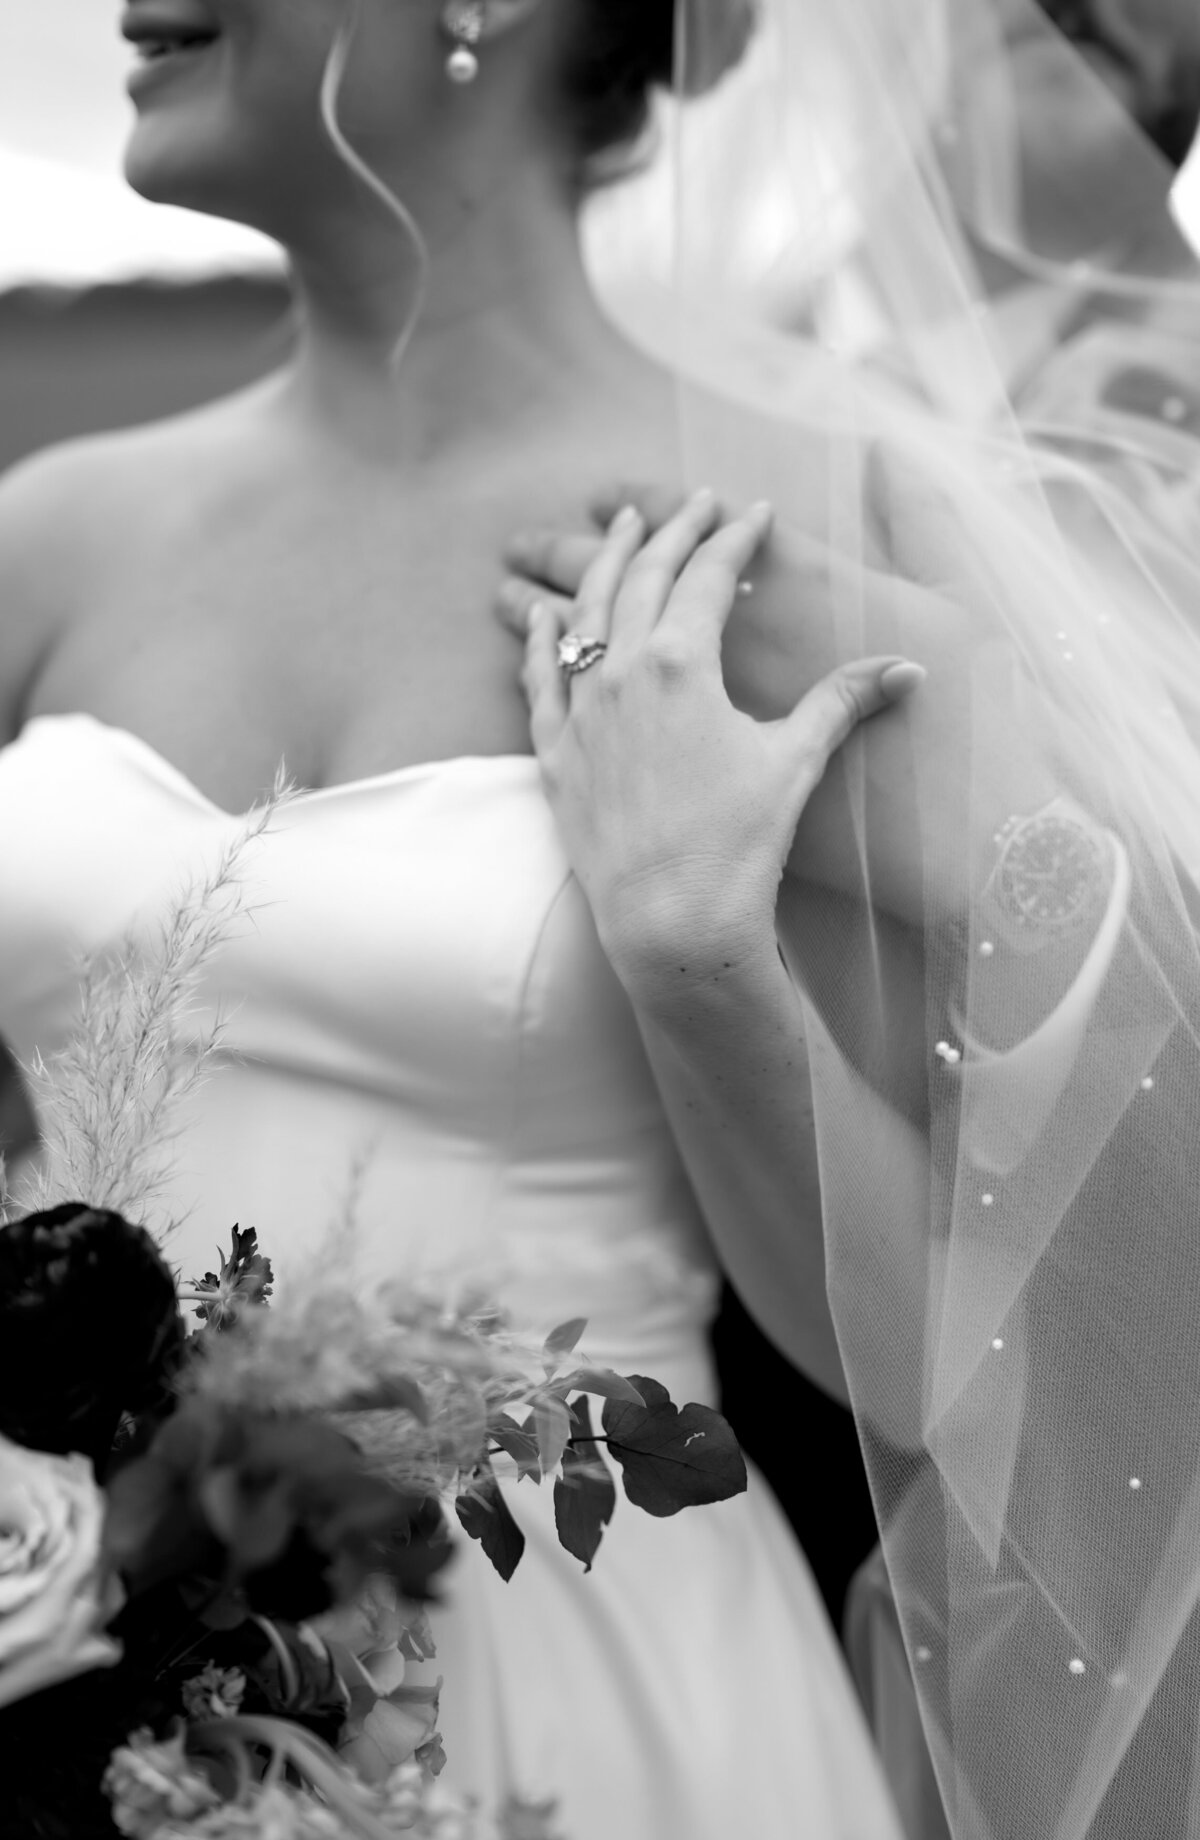 black and white weddin gphotos with groom holding brides shoulder with one hand as she reaches up to touch his hand with the brides veil with pearl beads flowing over photographed by Virginia wedding photographer